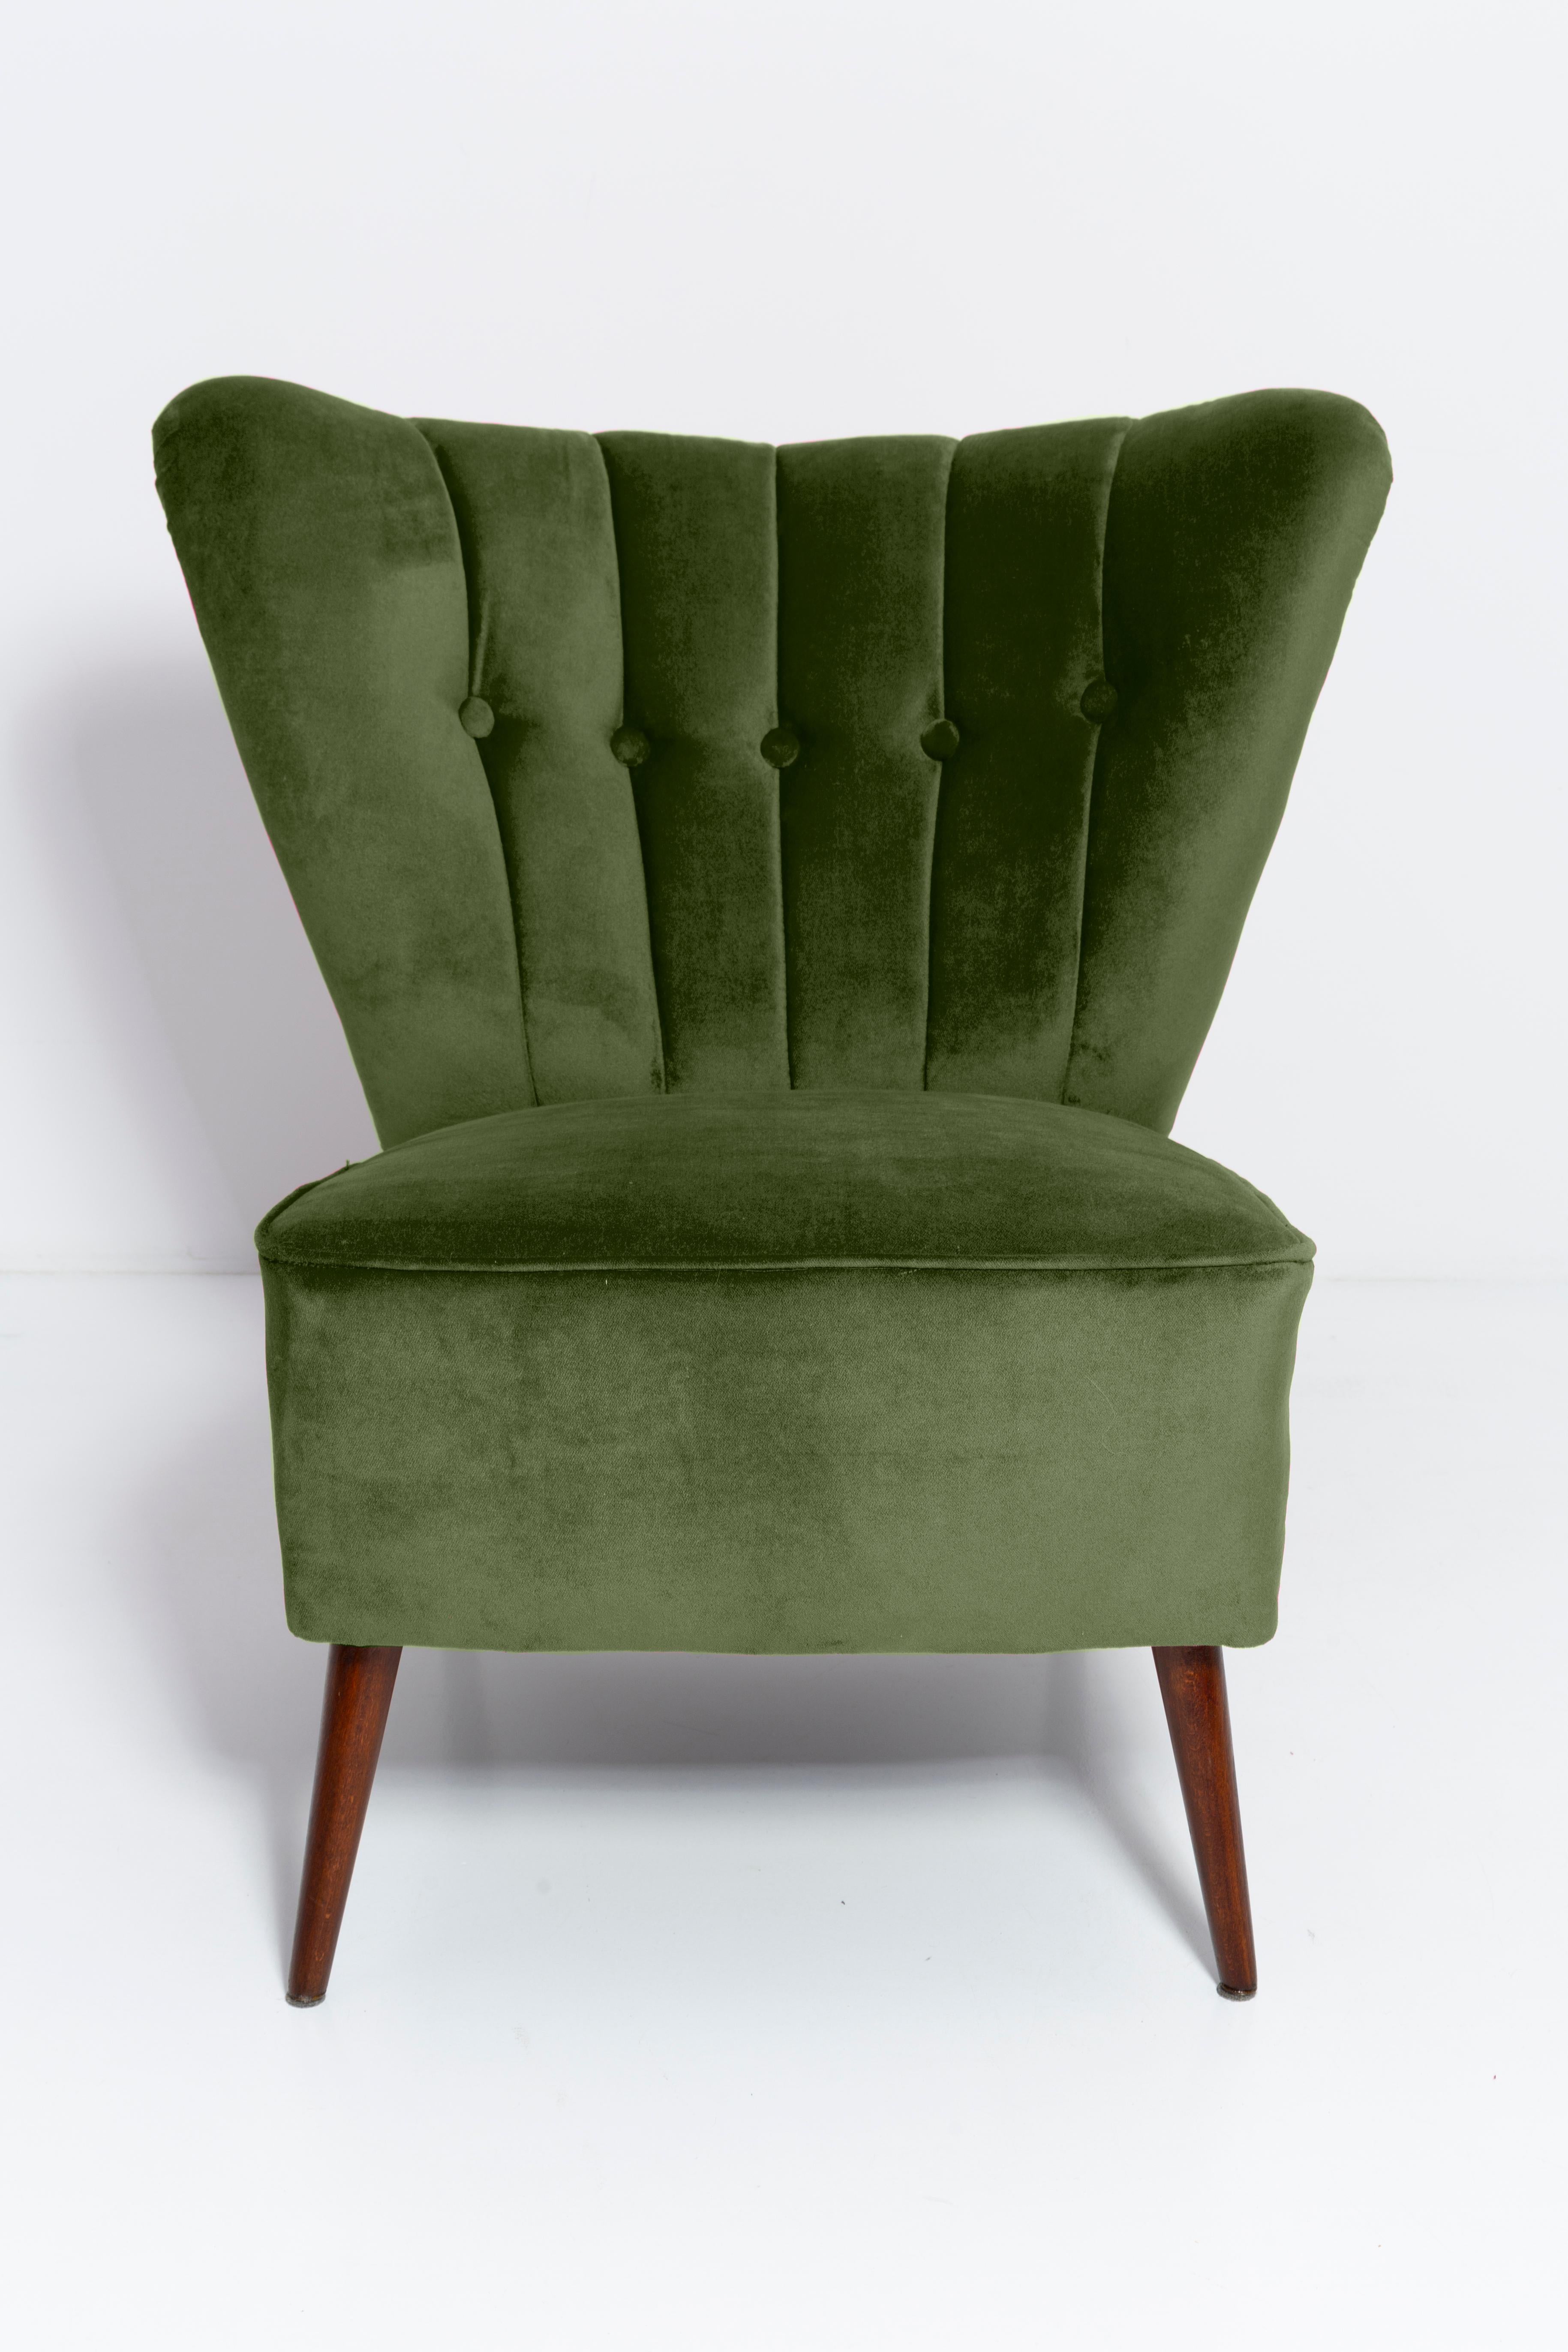 Set of Two Mid-Century Green Velvet Club Armchairs, Europe, 1960s For Sale 1